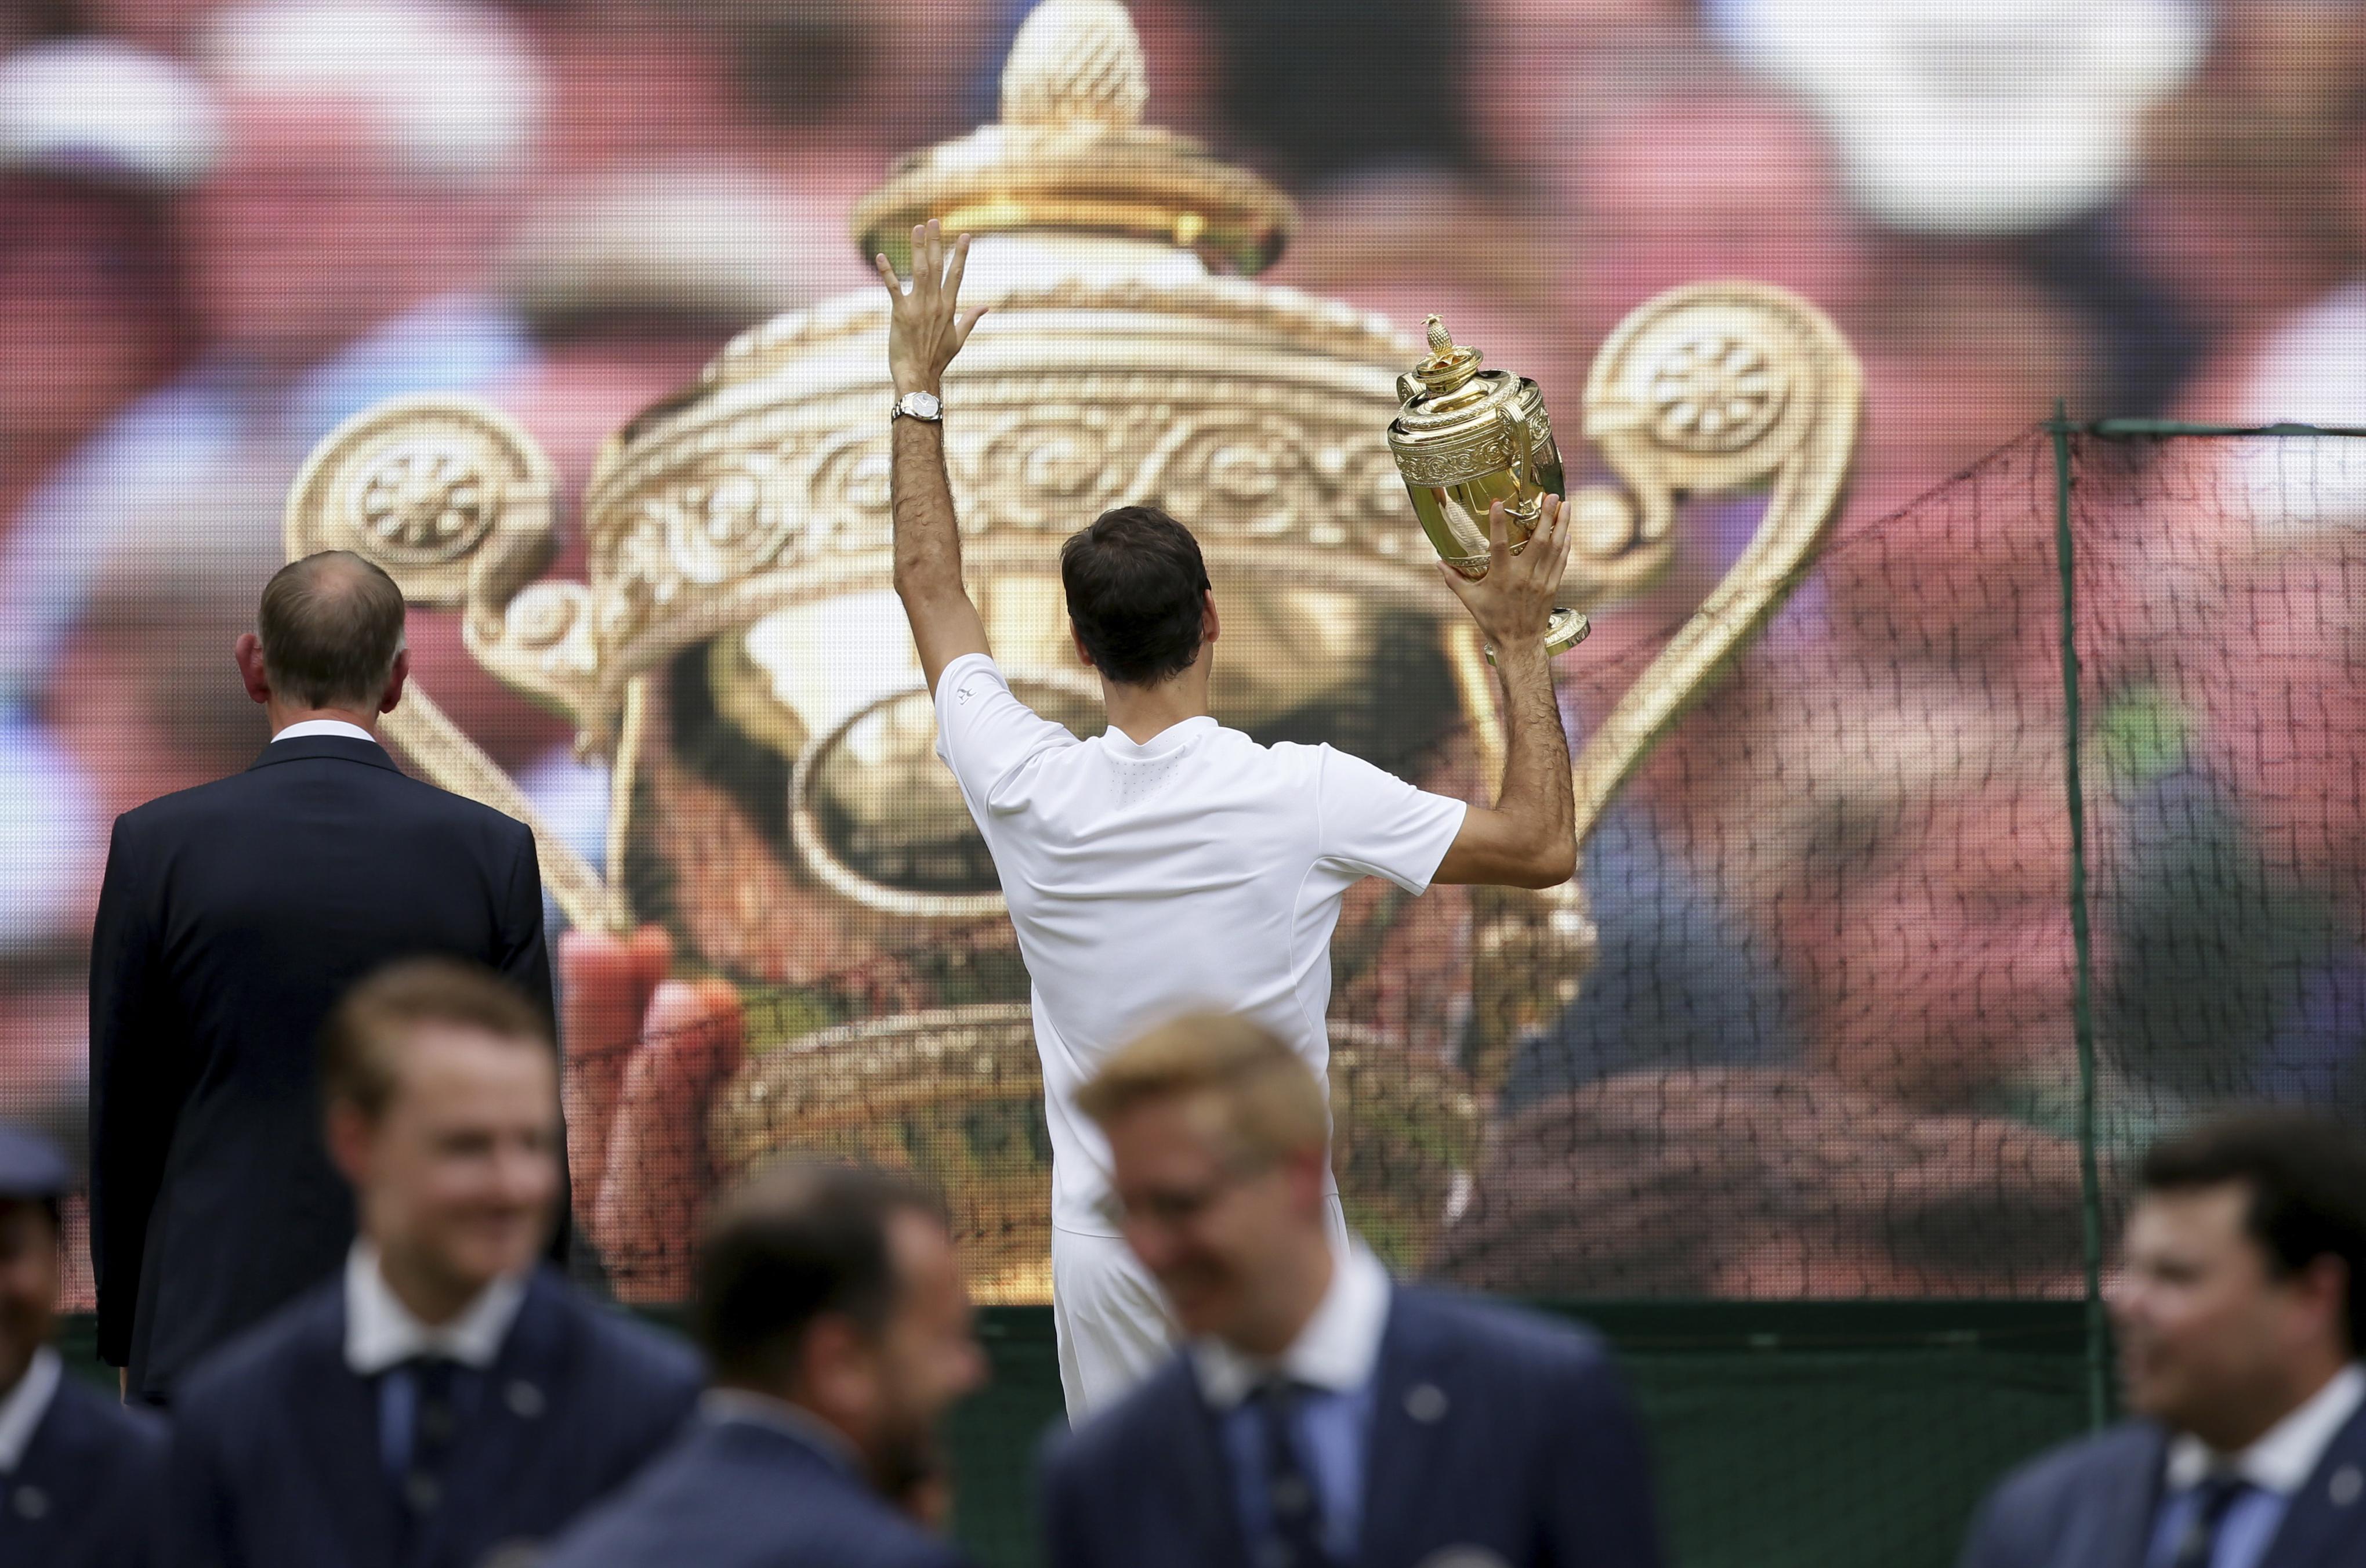 Roger Federer gets recordbreaking eighth Wimbledon title The